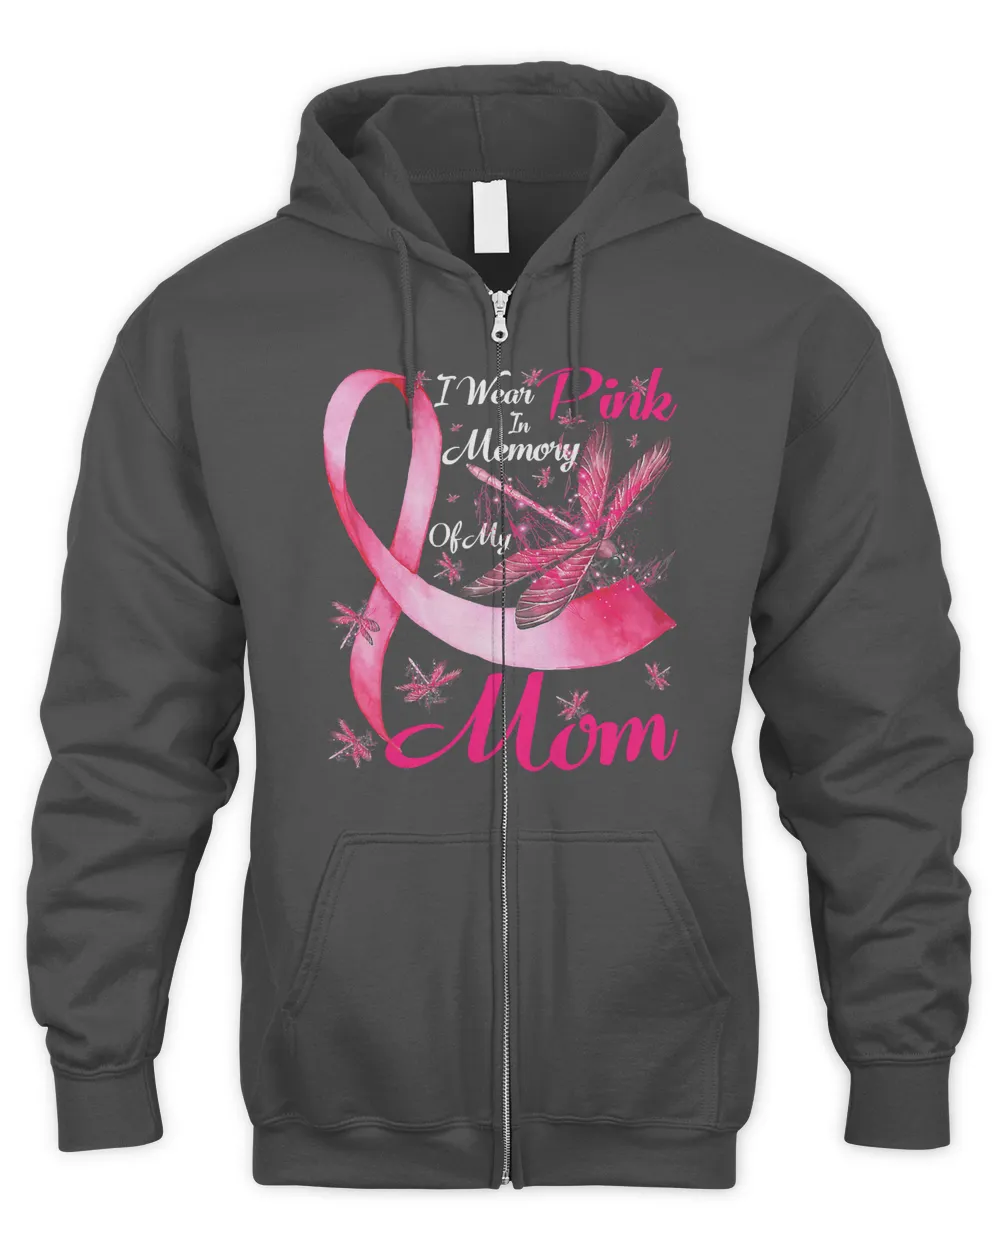 Breast Cancer I Wear Pink In Memory Of My Mom Dragonfly Breast Cancer 24 Warrior